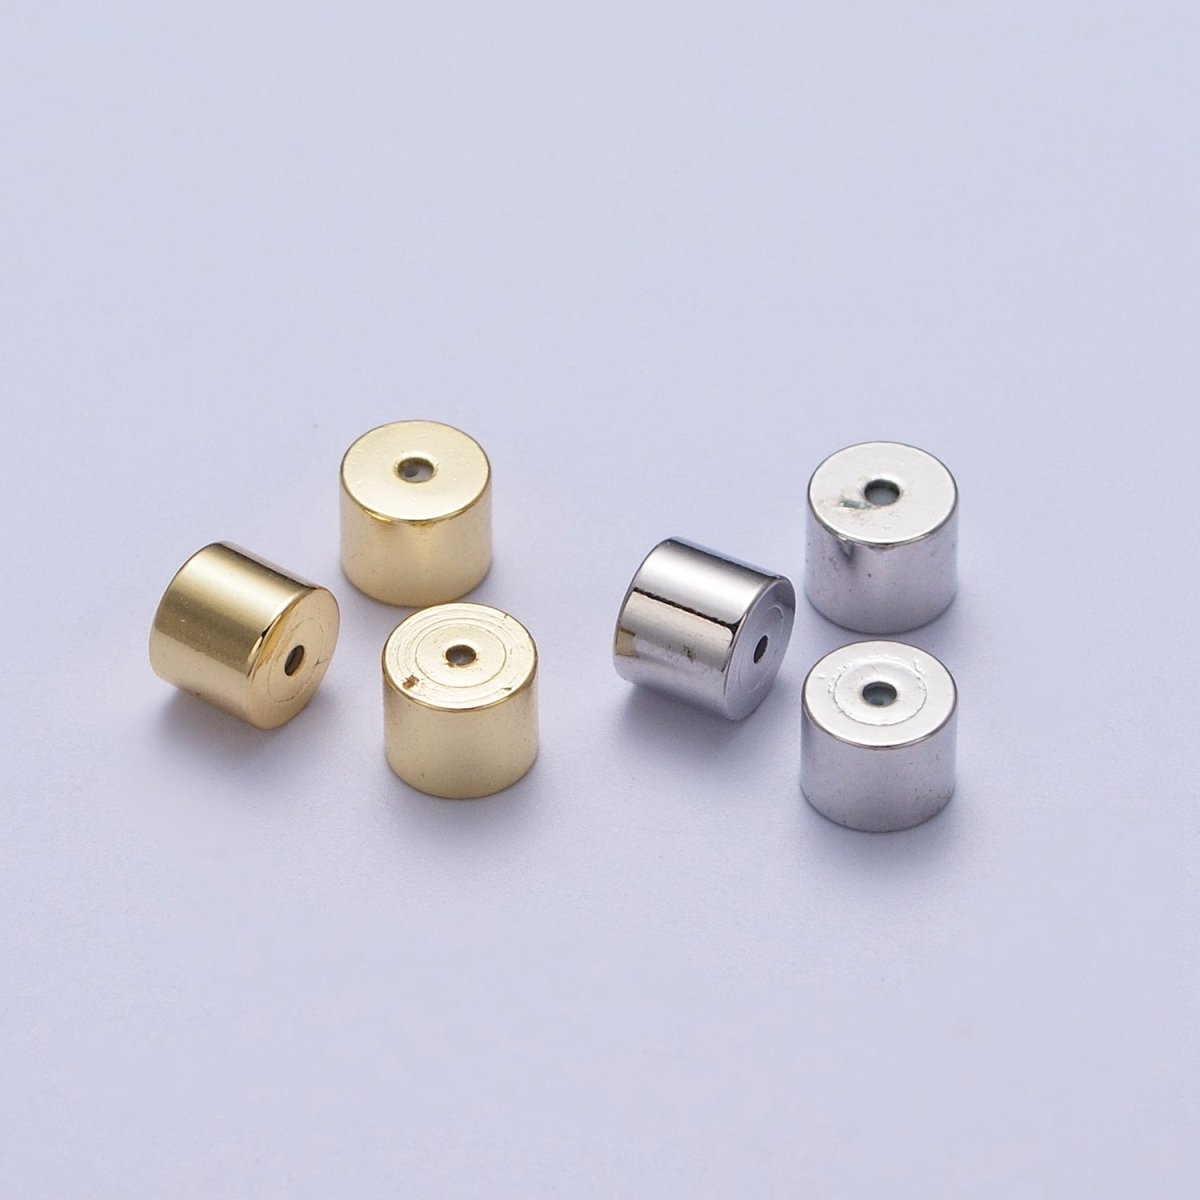 Minimalist Cylinder Earrings Backings Jewelry Supply (12 Pieces) Set in Gold & Silver | K-074 K-076 - DLUXCA